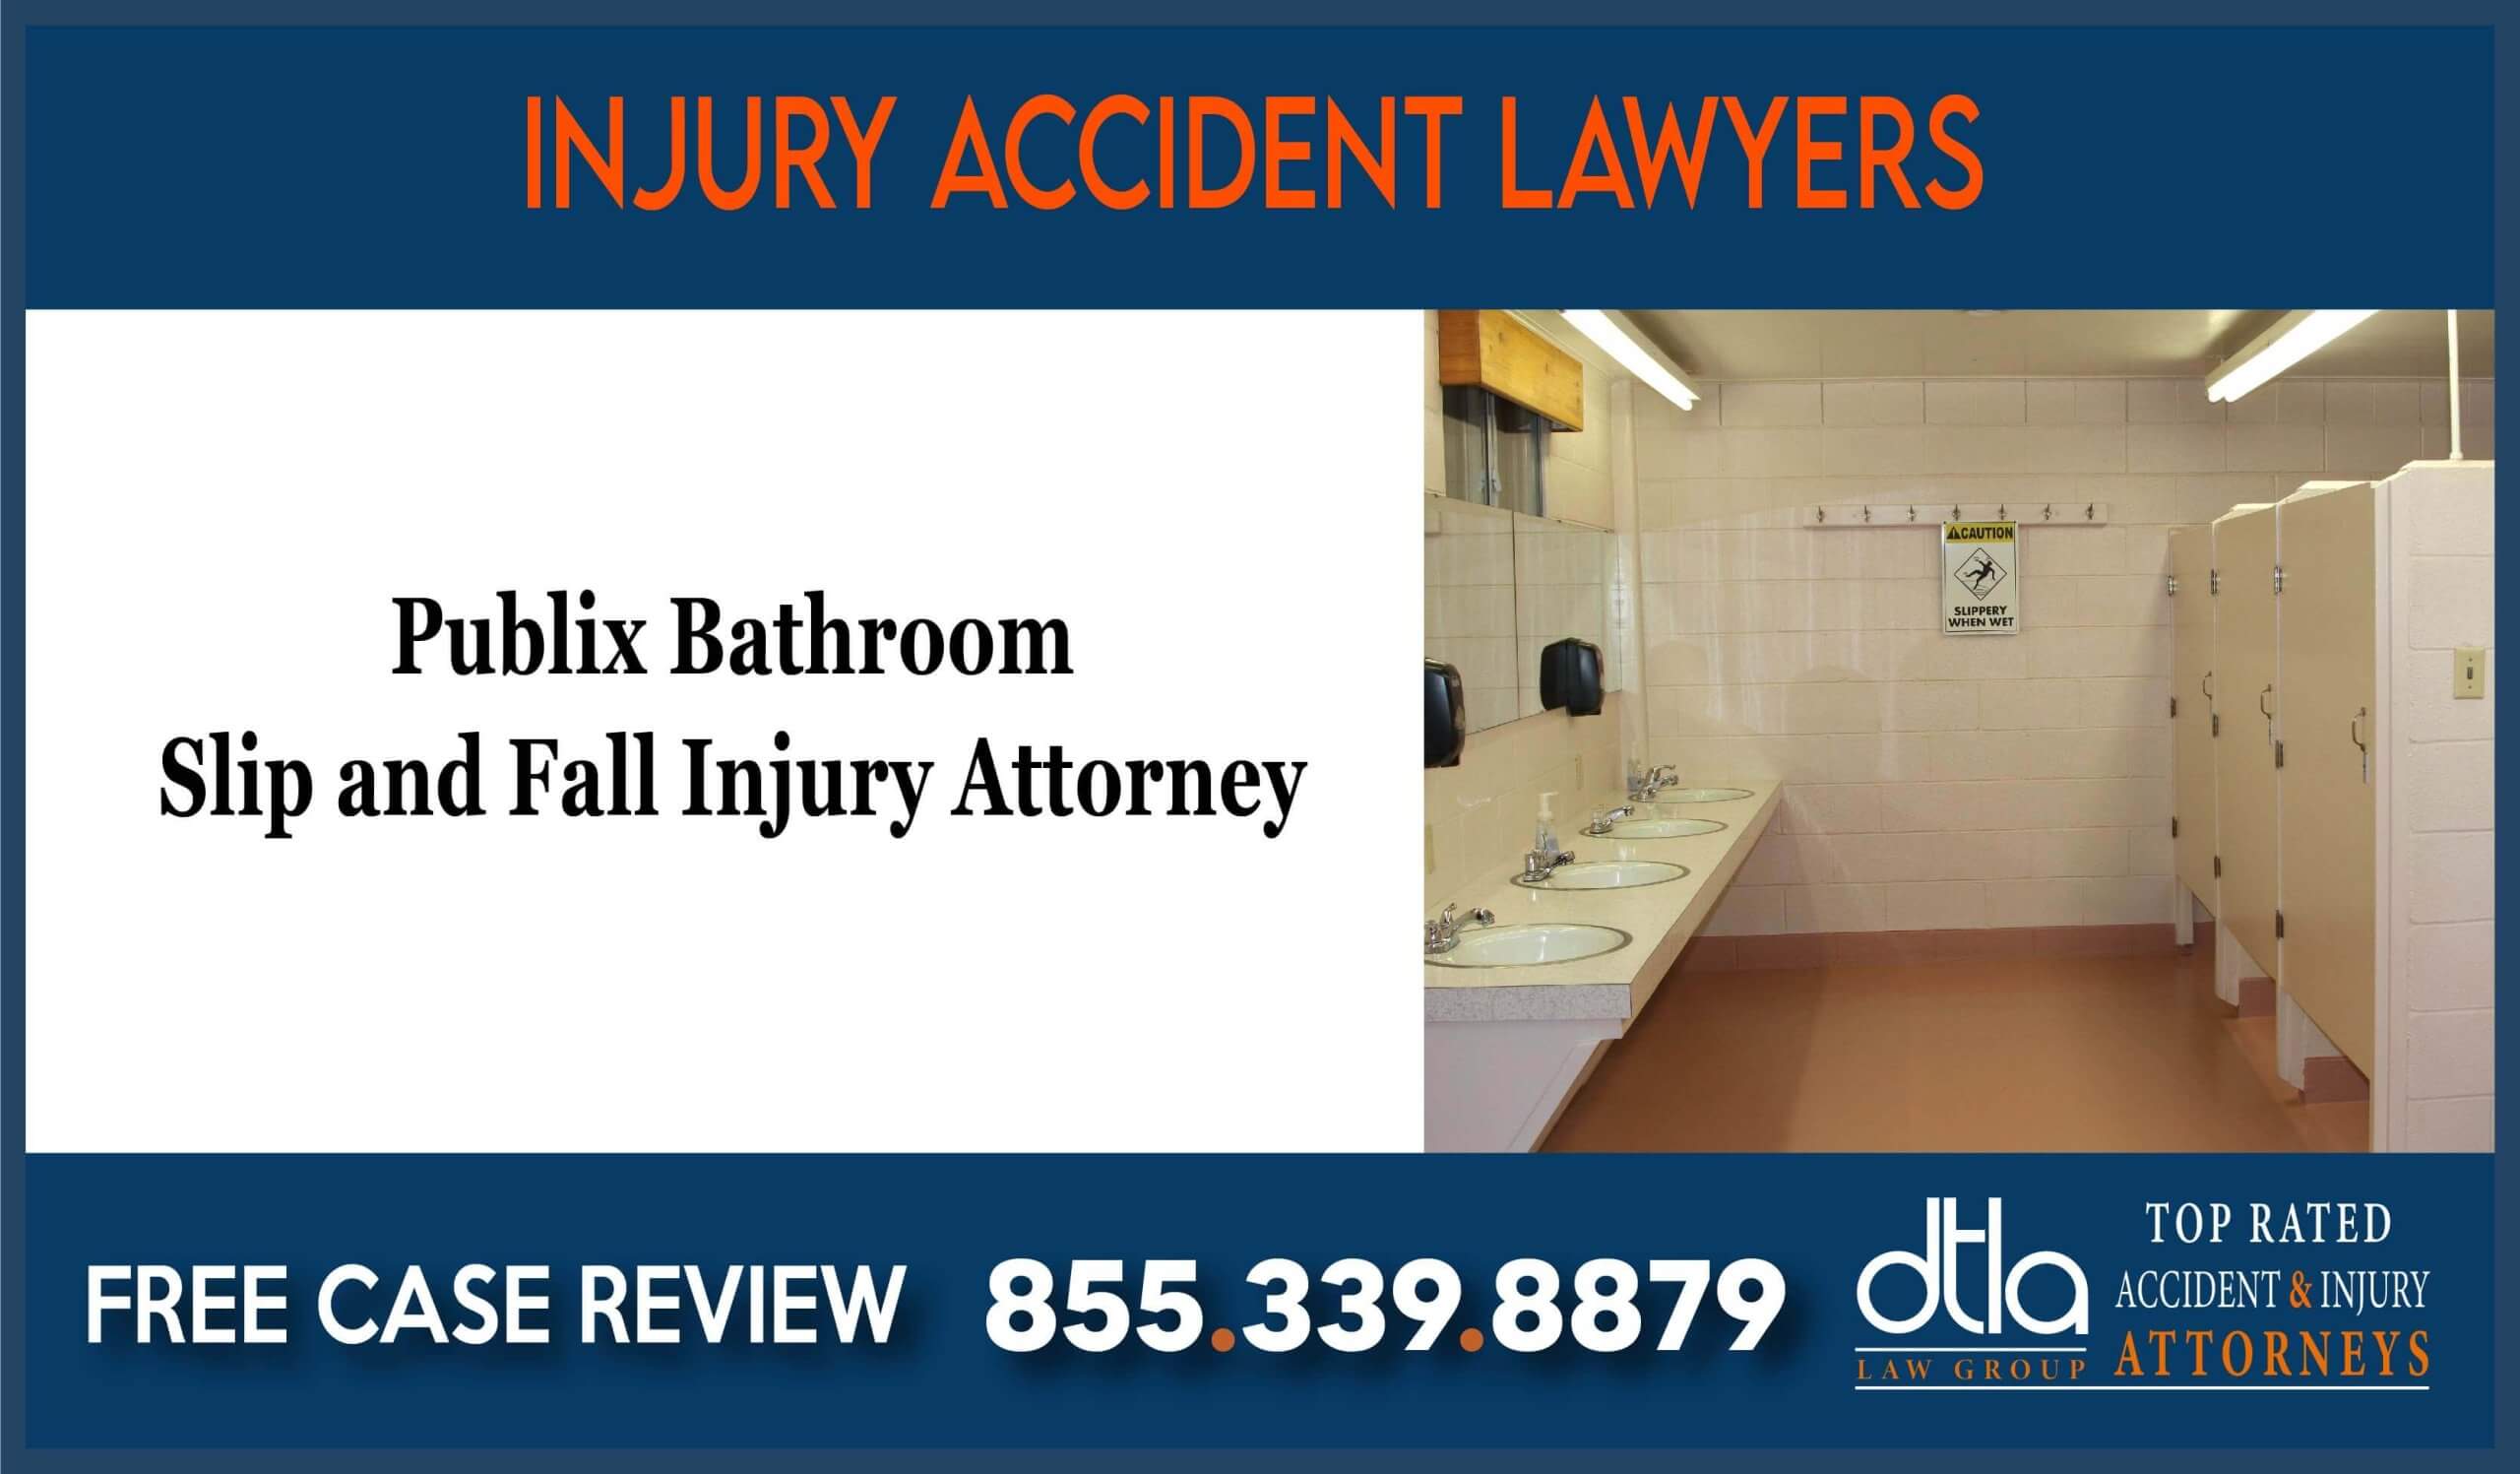 Publix Bathroom Slip and Fall Injury Attorney liability sue compensation incident lawyer